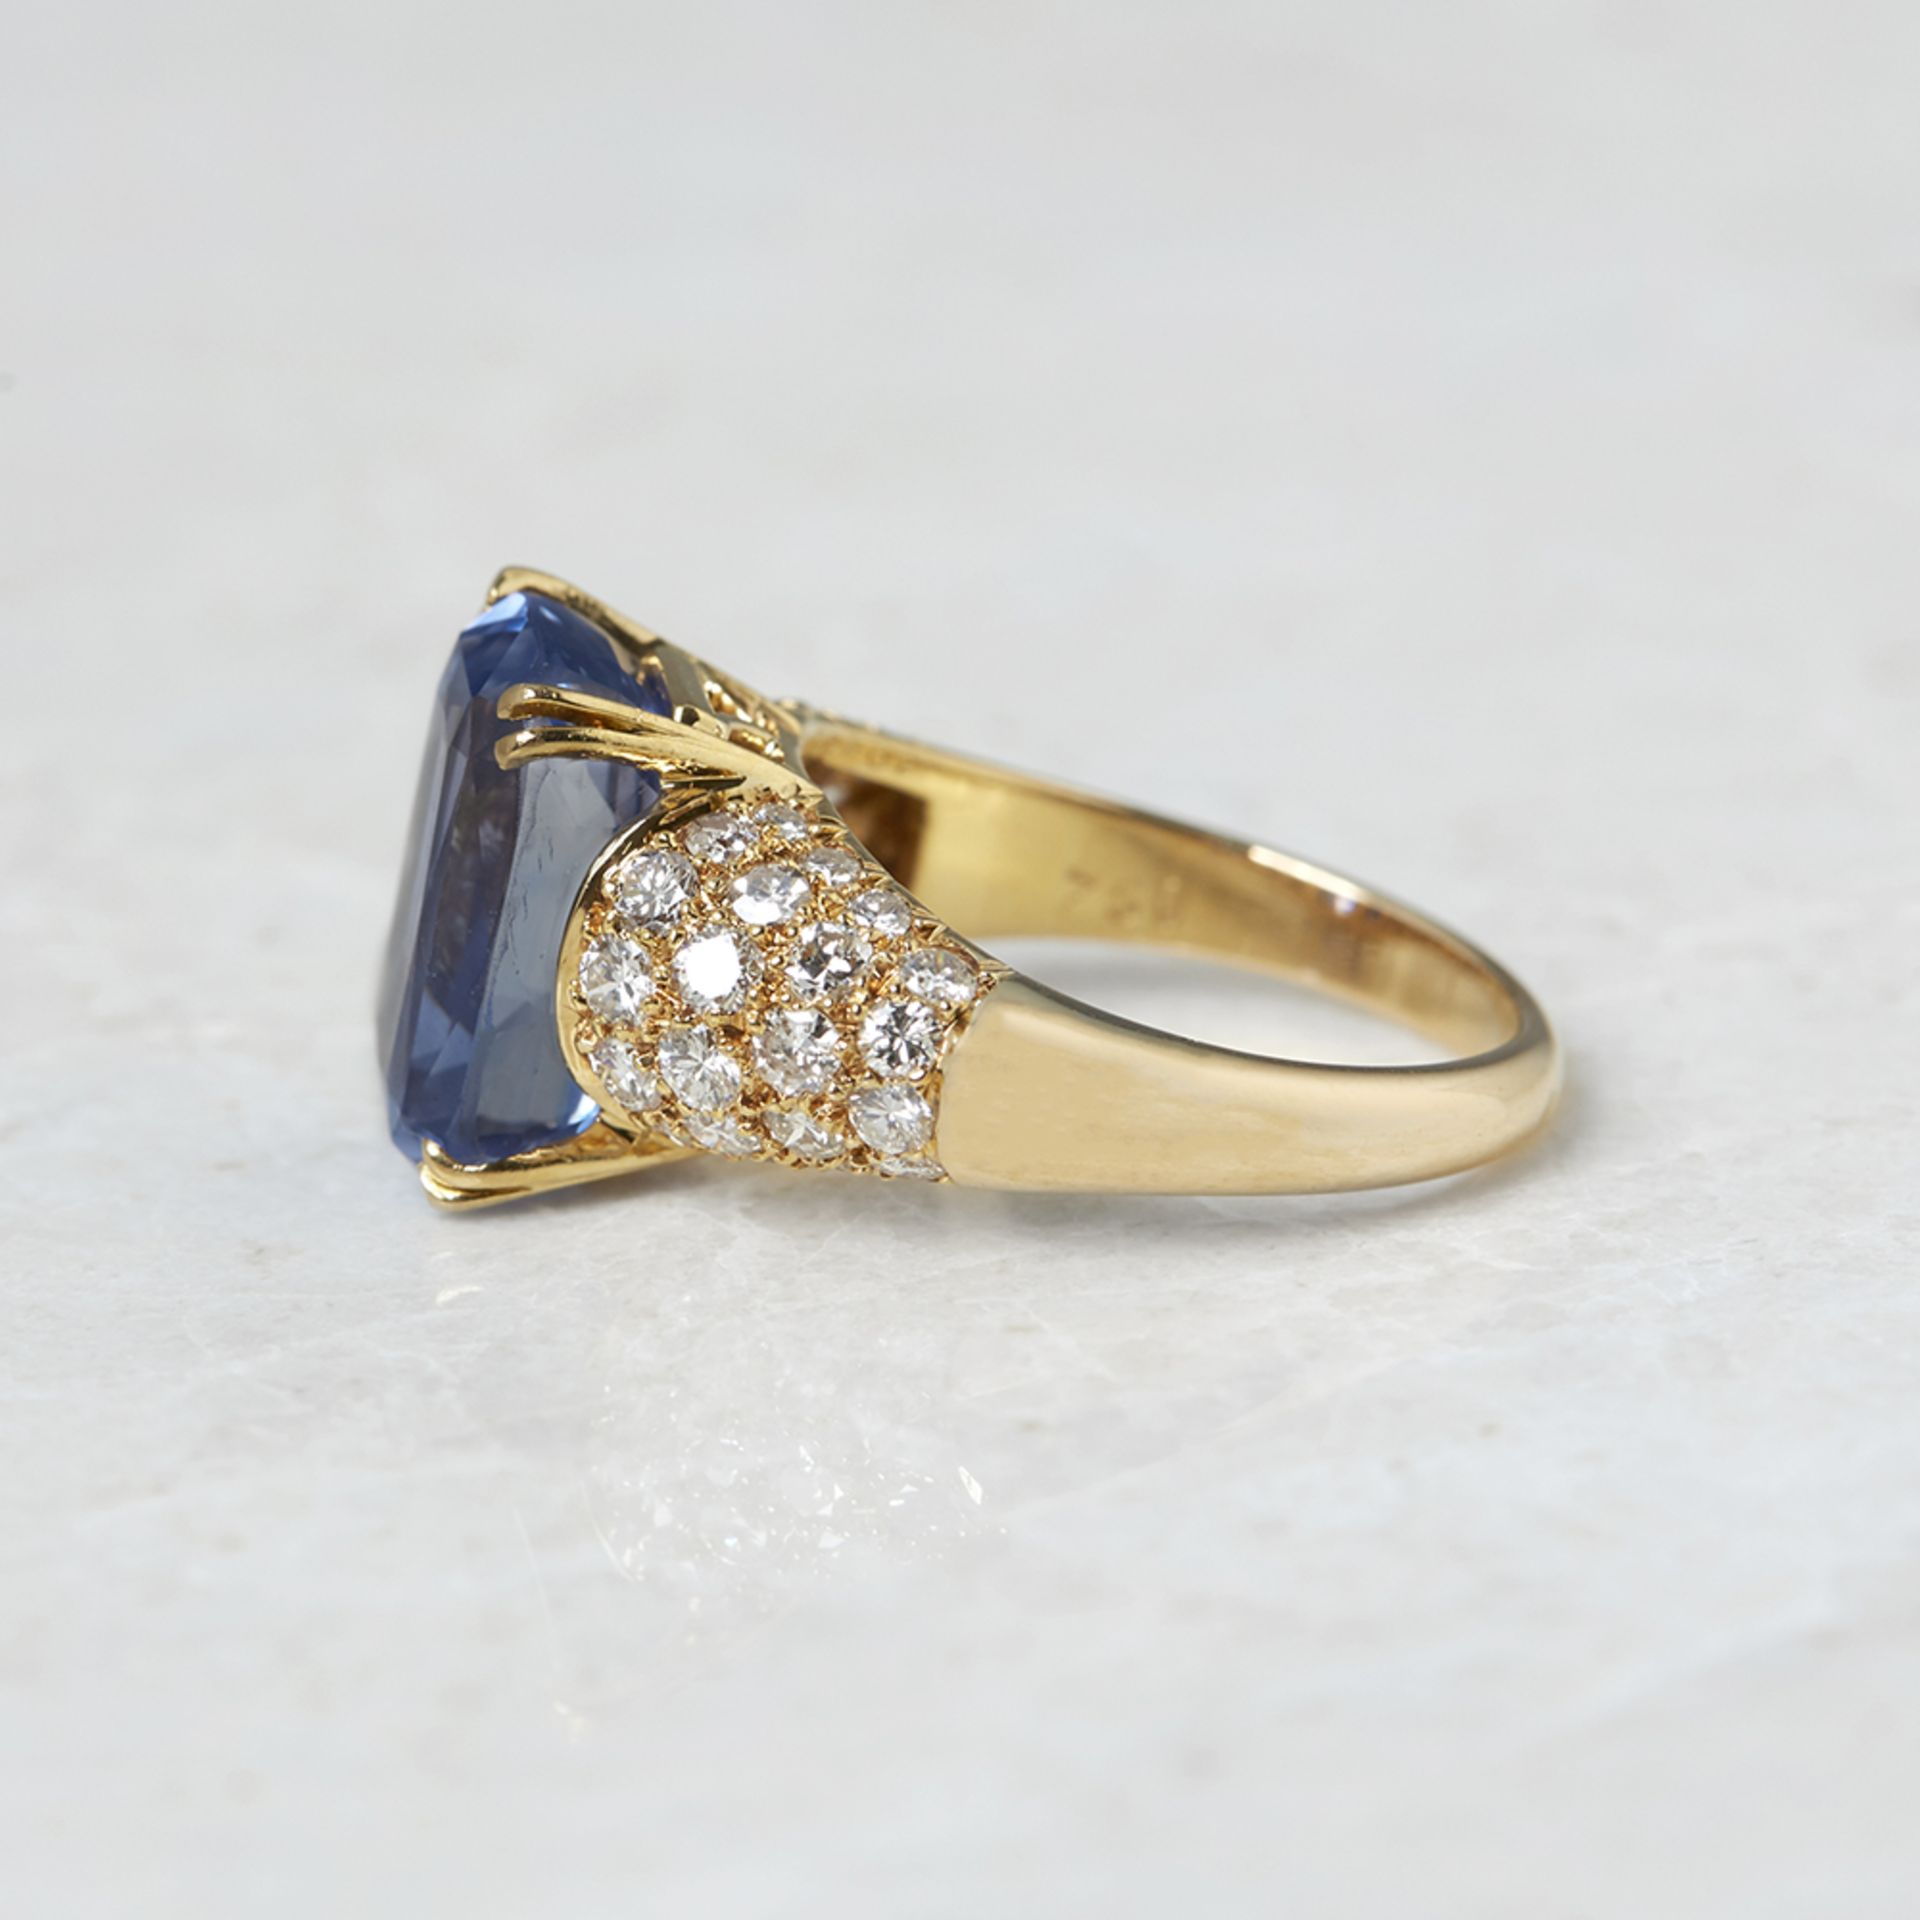 Van Cleef & Arpels 18k Yellow Gold 10.73ct Ceylon Sapphire & 1.80ct Diamond Ring with AGL Report - Image 4 of 9